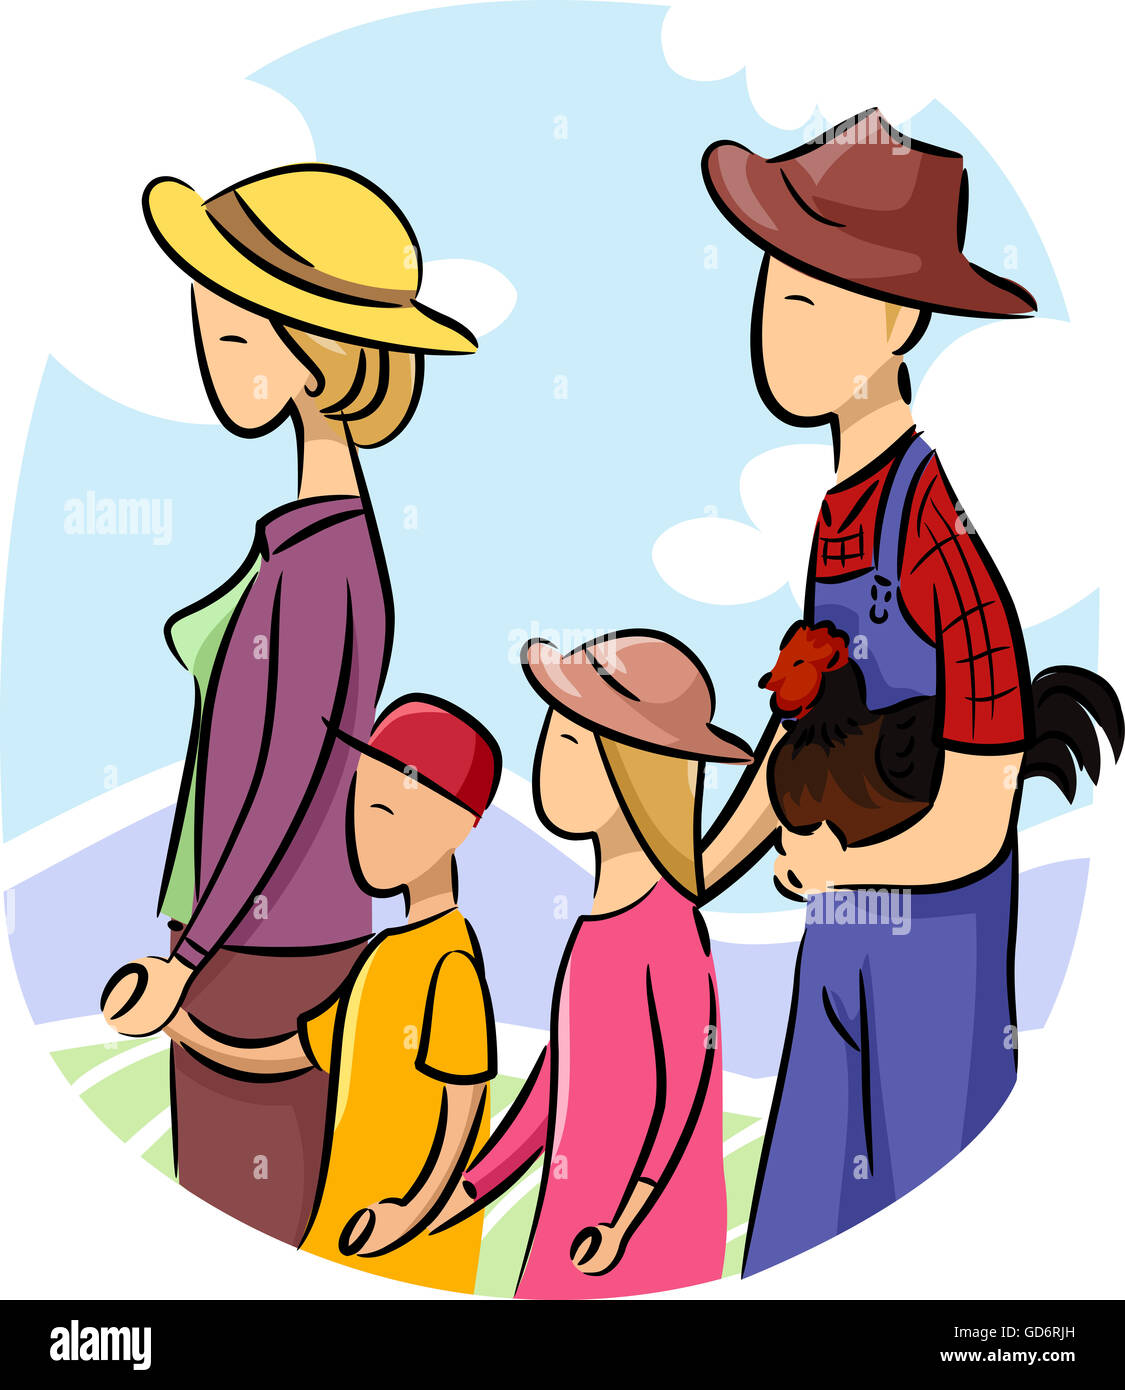 Illustration of a Family walking with Chicken Stock Photo